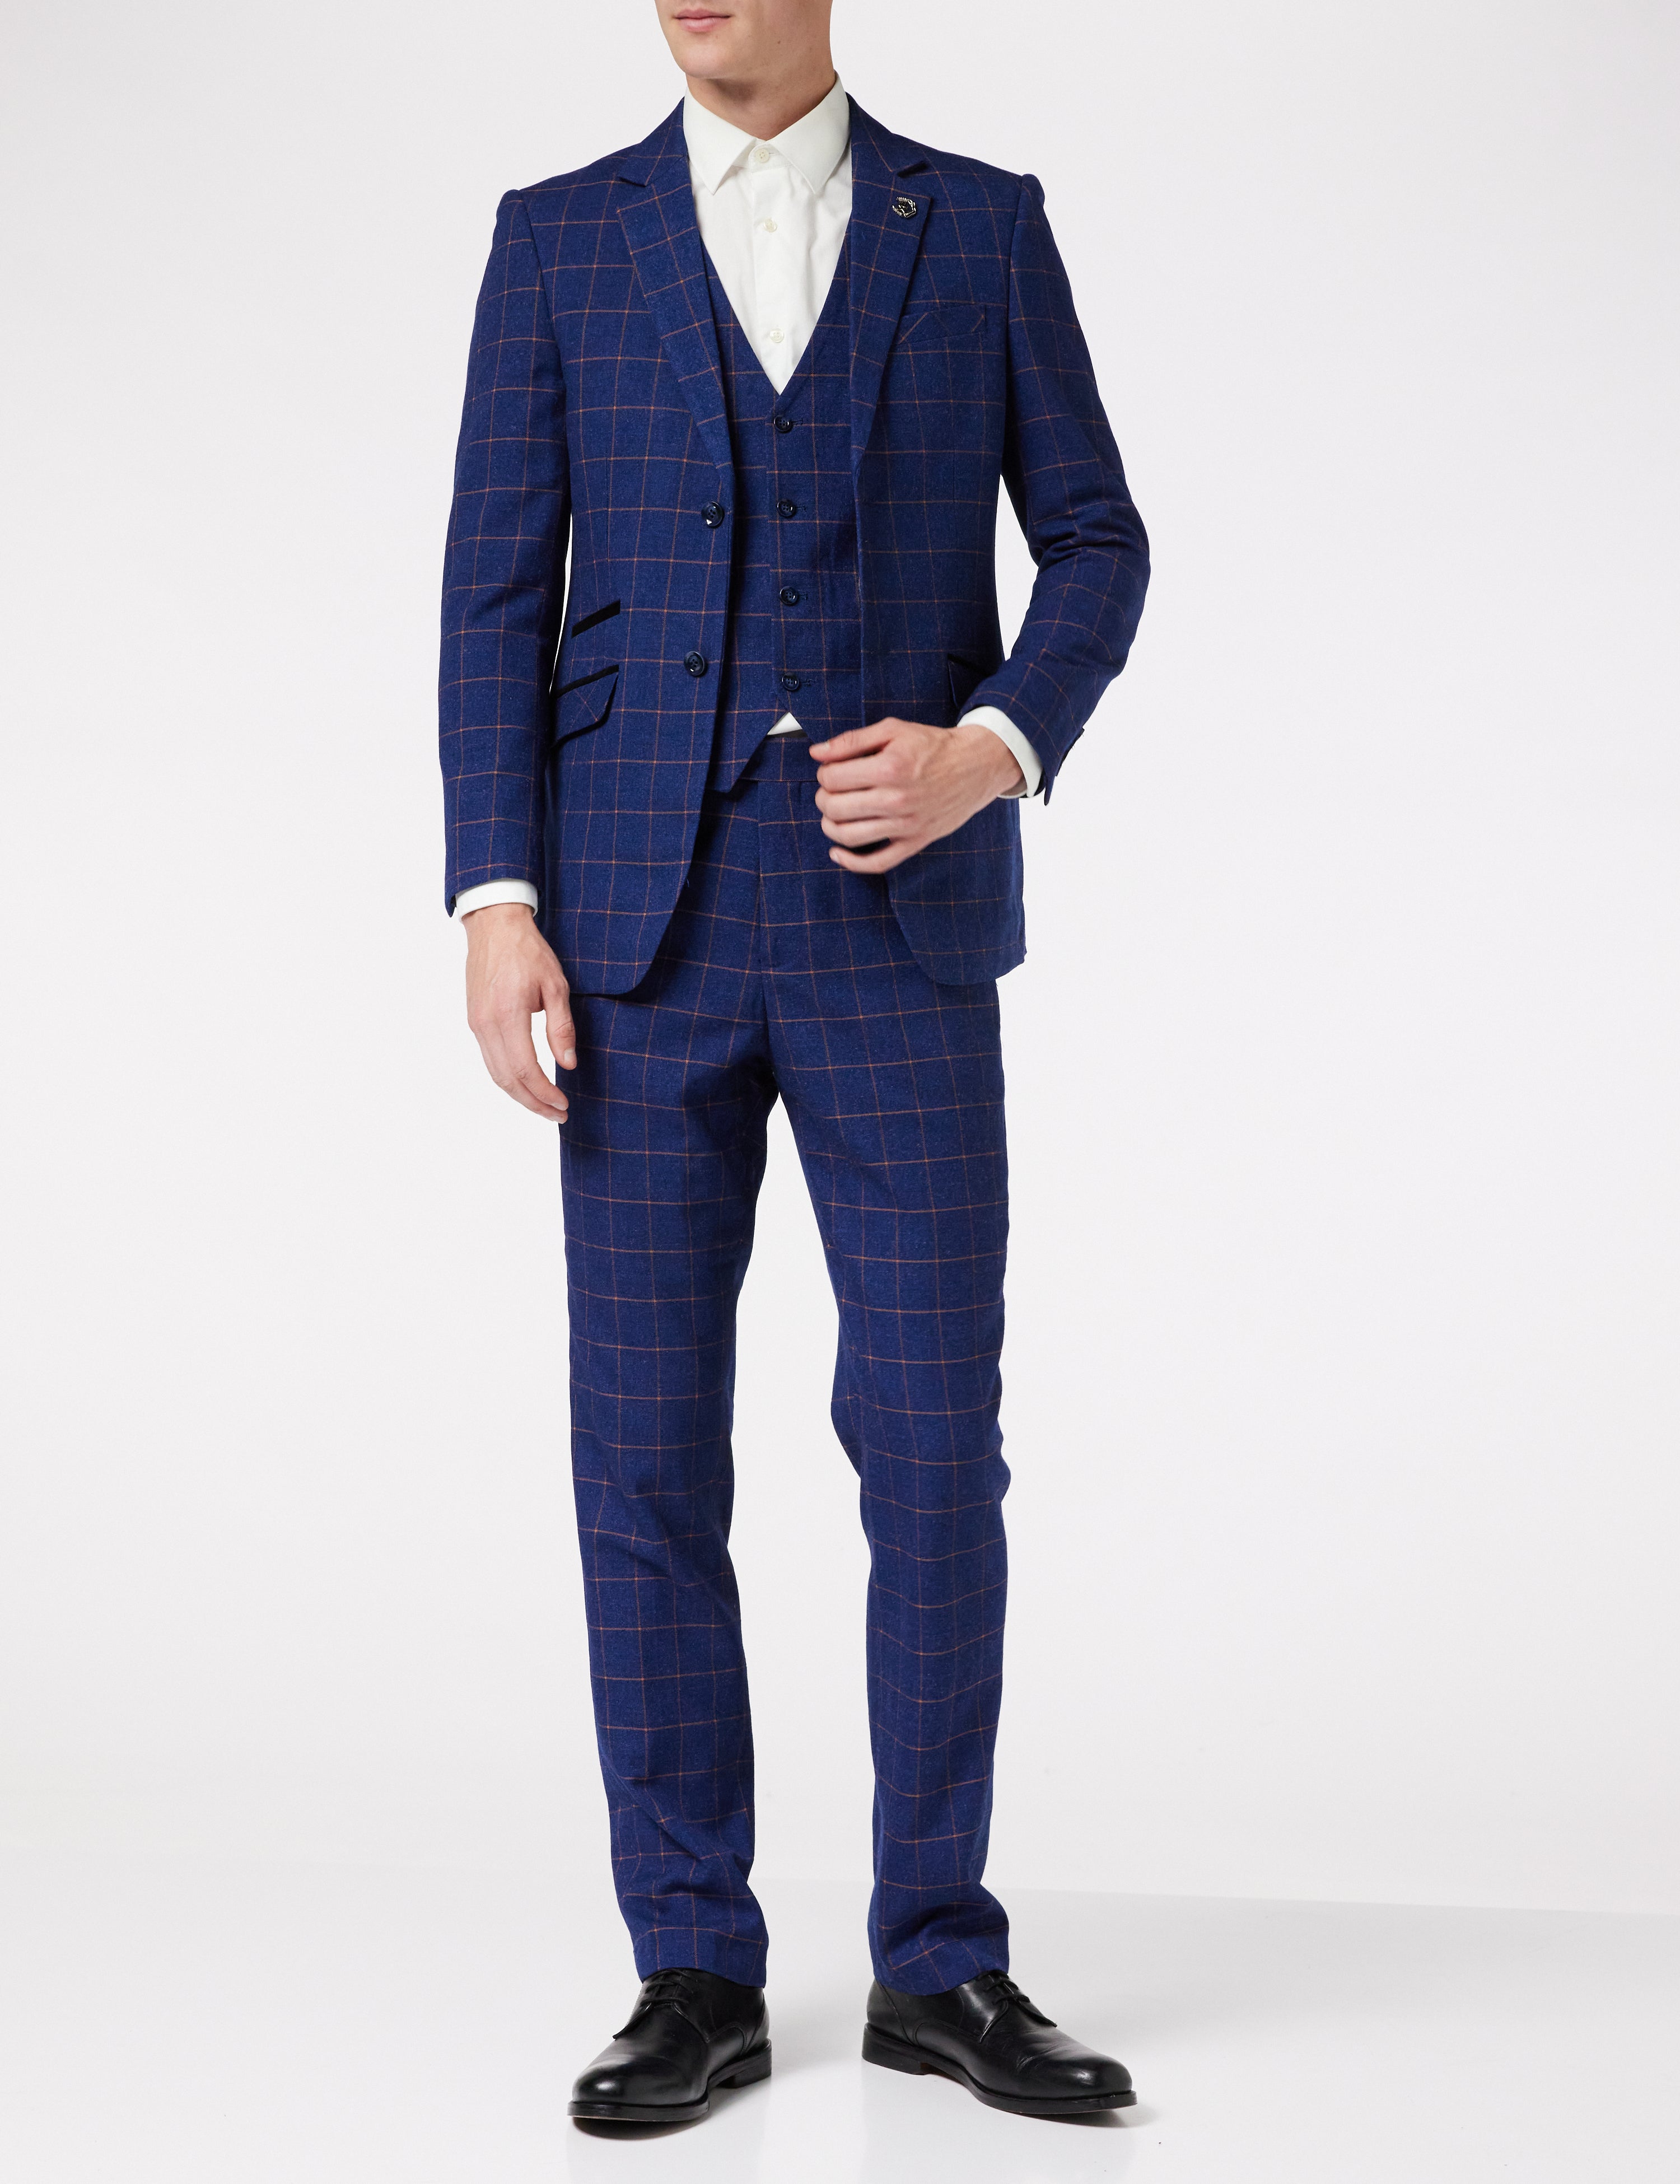 Mens Vintage Style Suits in 3-Piece, Slim and Tailored Fit | XPOSED